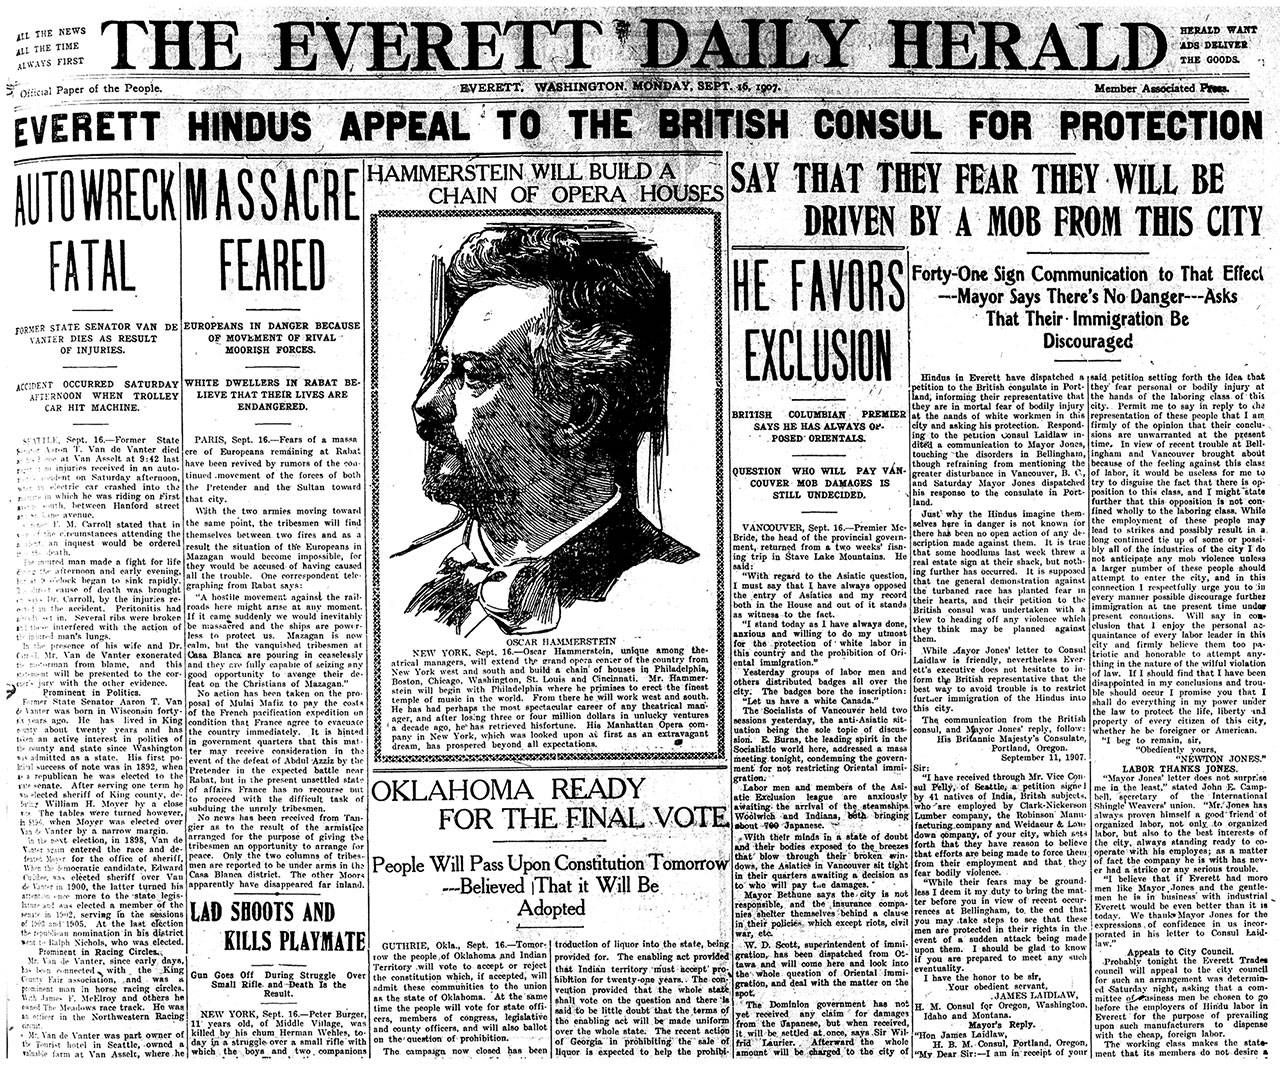 The front page of The Everett Daily Herald of Sept. 16, 1907. (Image courtesy of the Everett Public Library)